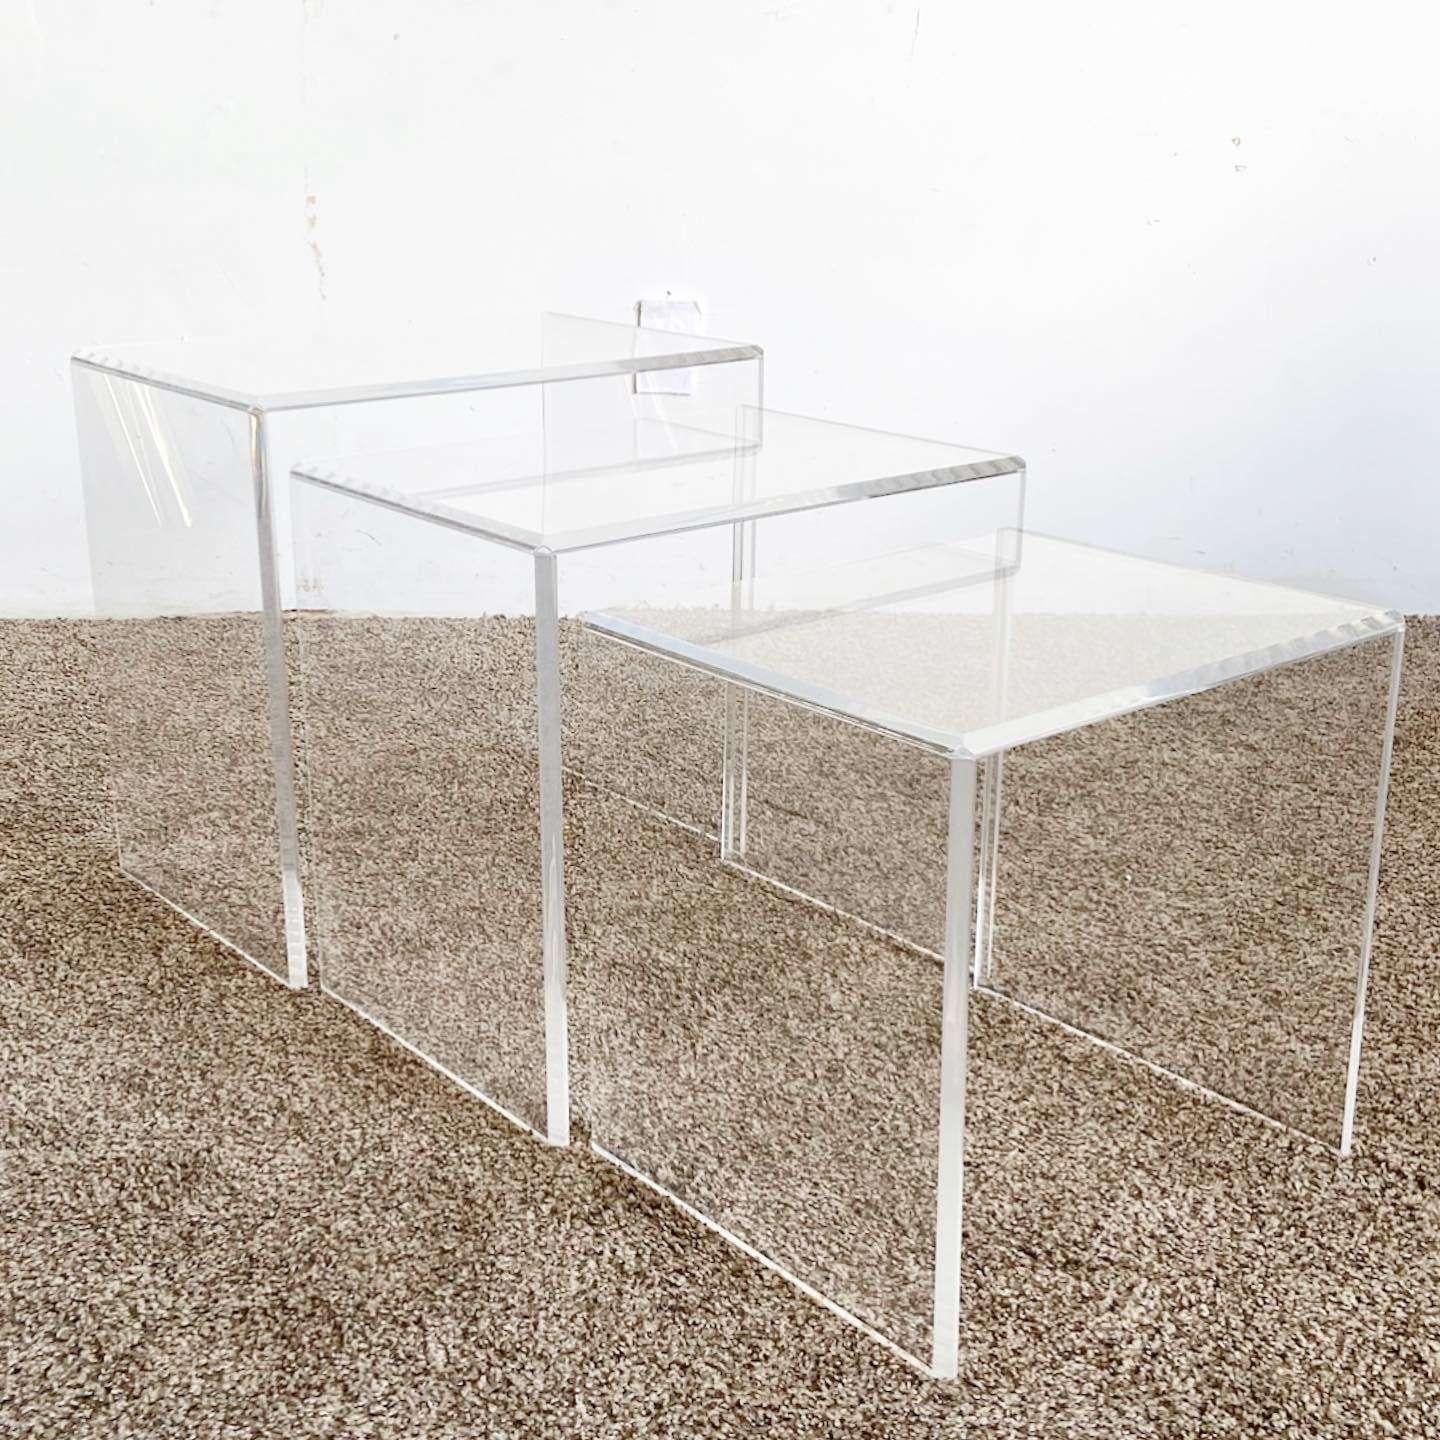 Excellent set of 3 vintage postmodern lucite nesting tables. Each table is comprised of three rectangular pieces of lucite.

Small table measures 17”W, 14”D, 16”H
Medium table measures 19”W, 14”D, 18”H